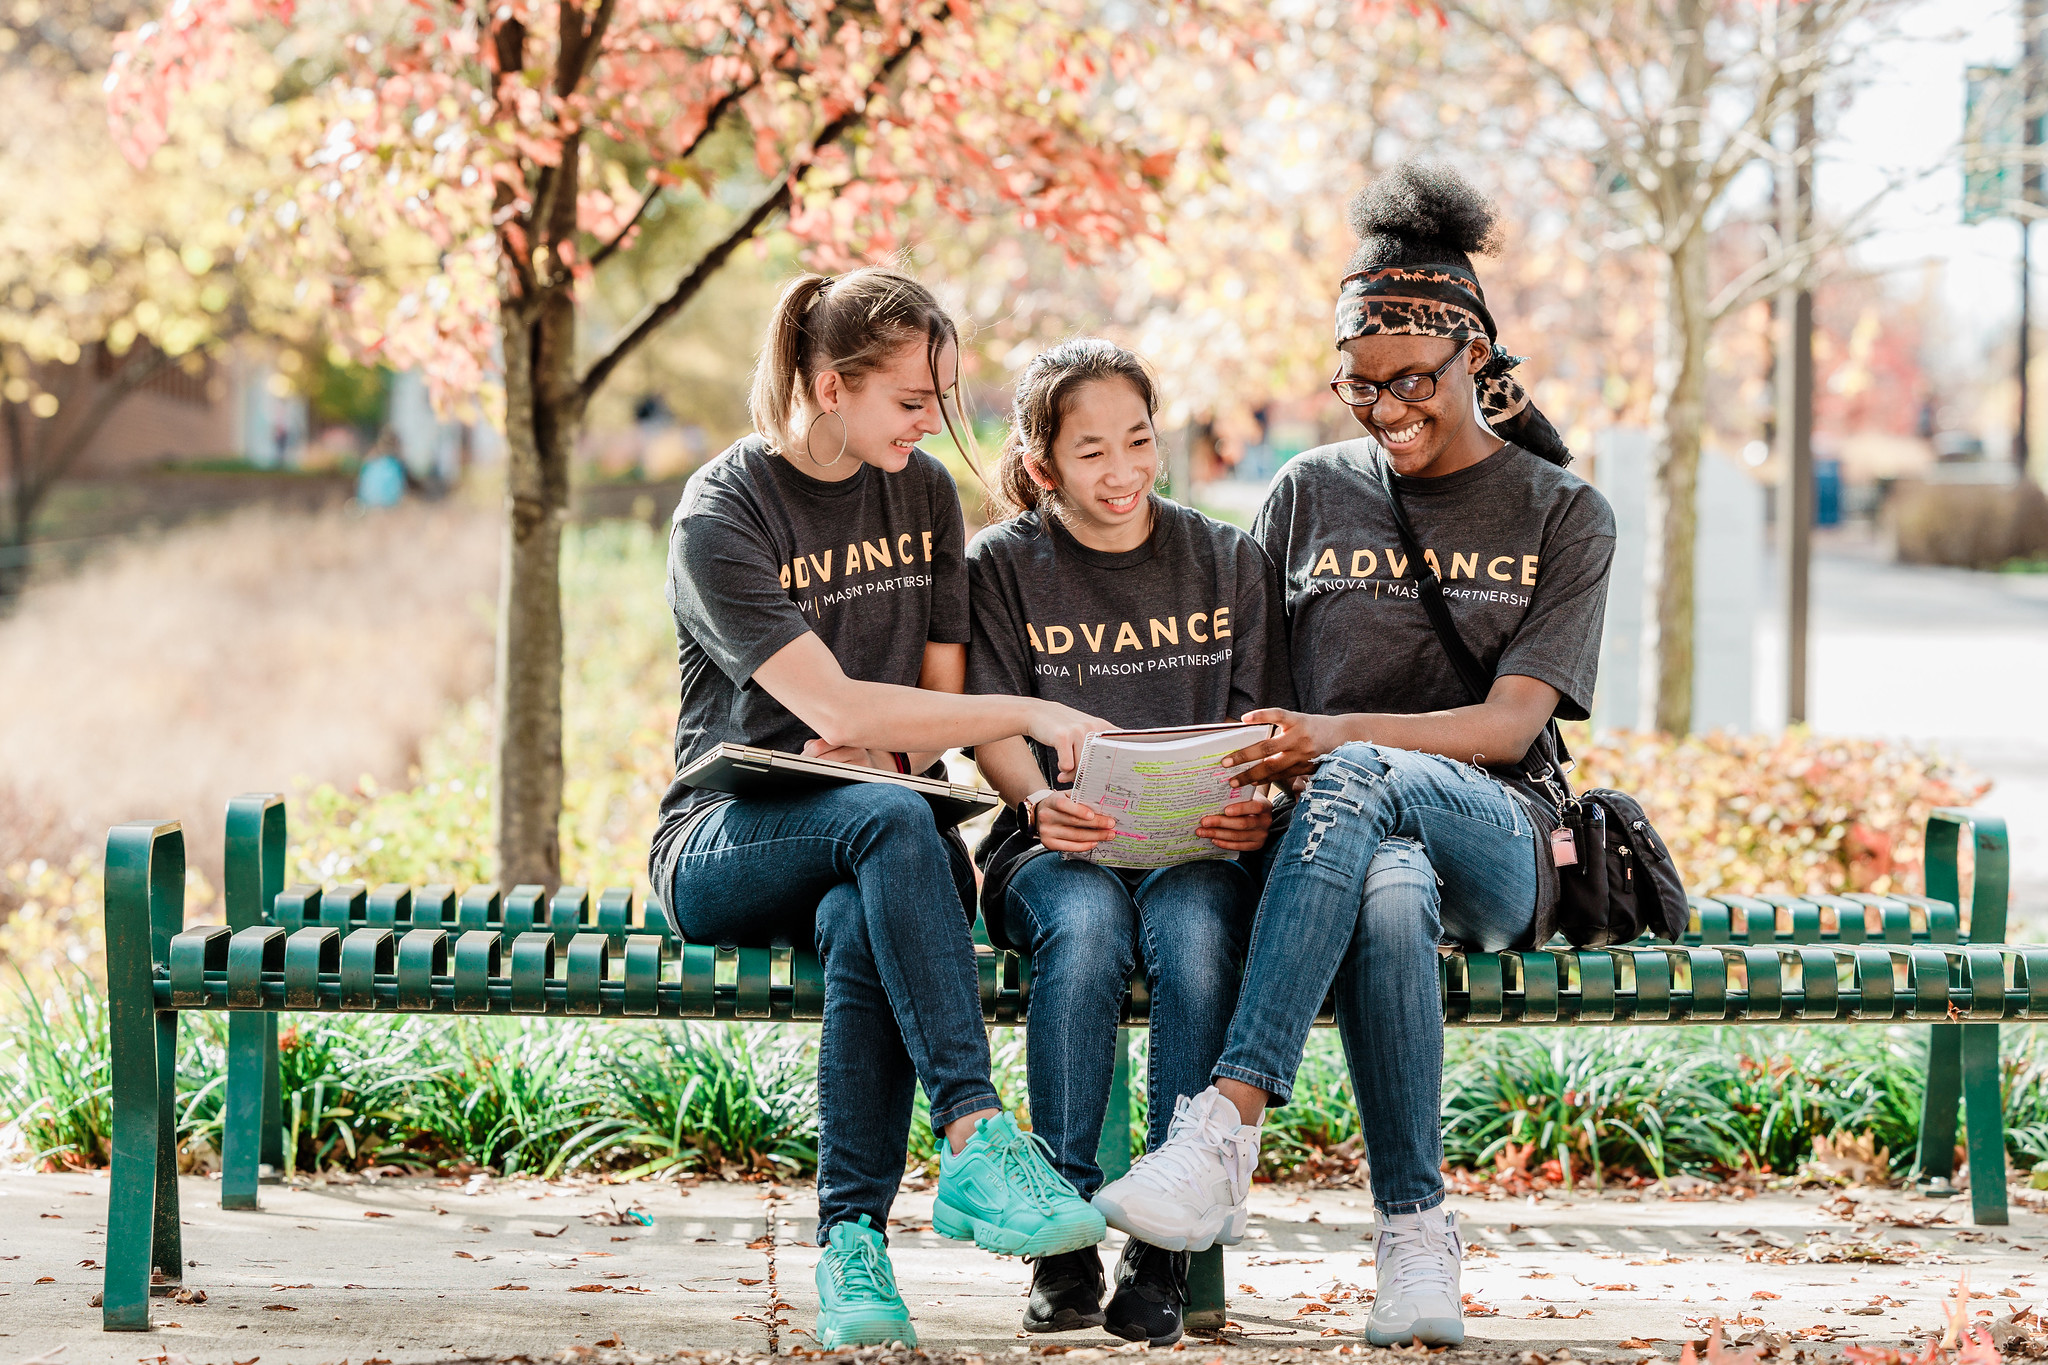 Three college students wearing shirts that say "ADVANCE" smiles as they sit next to each other on a bench.